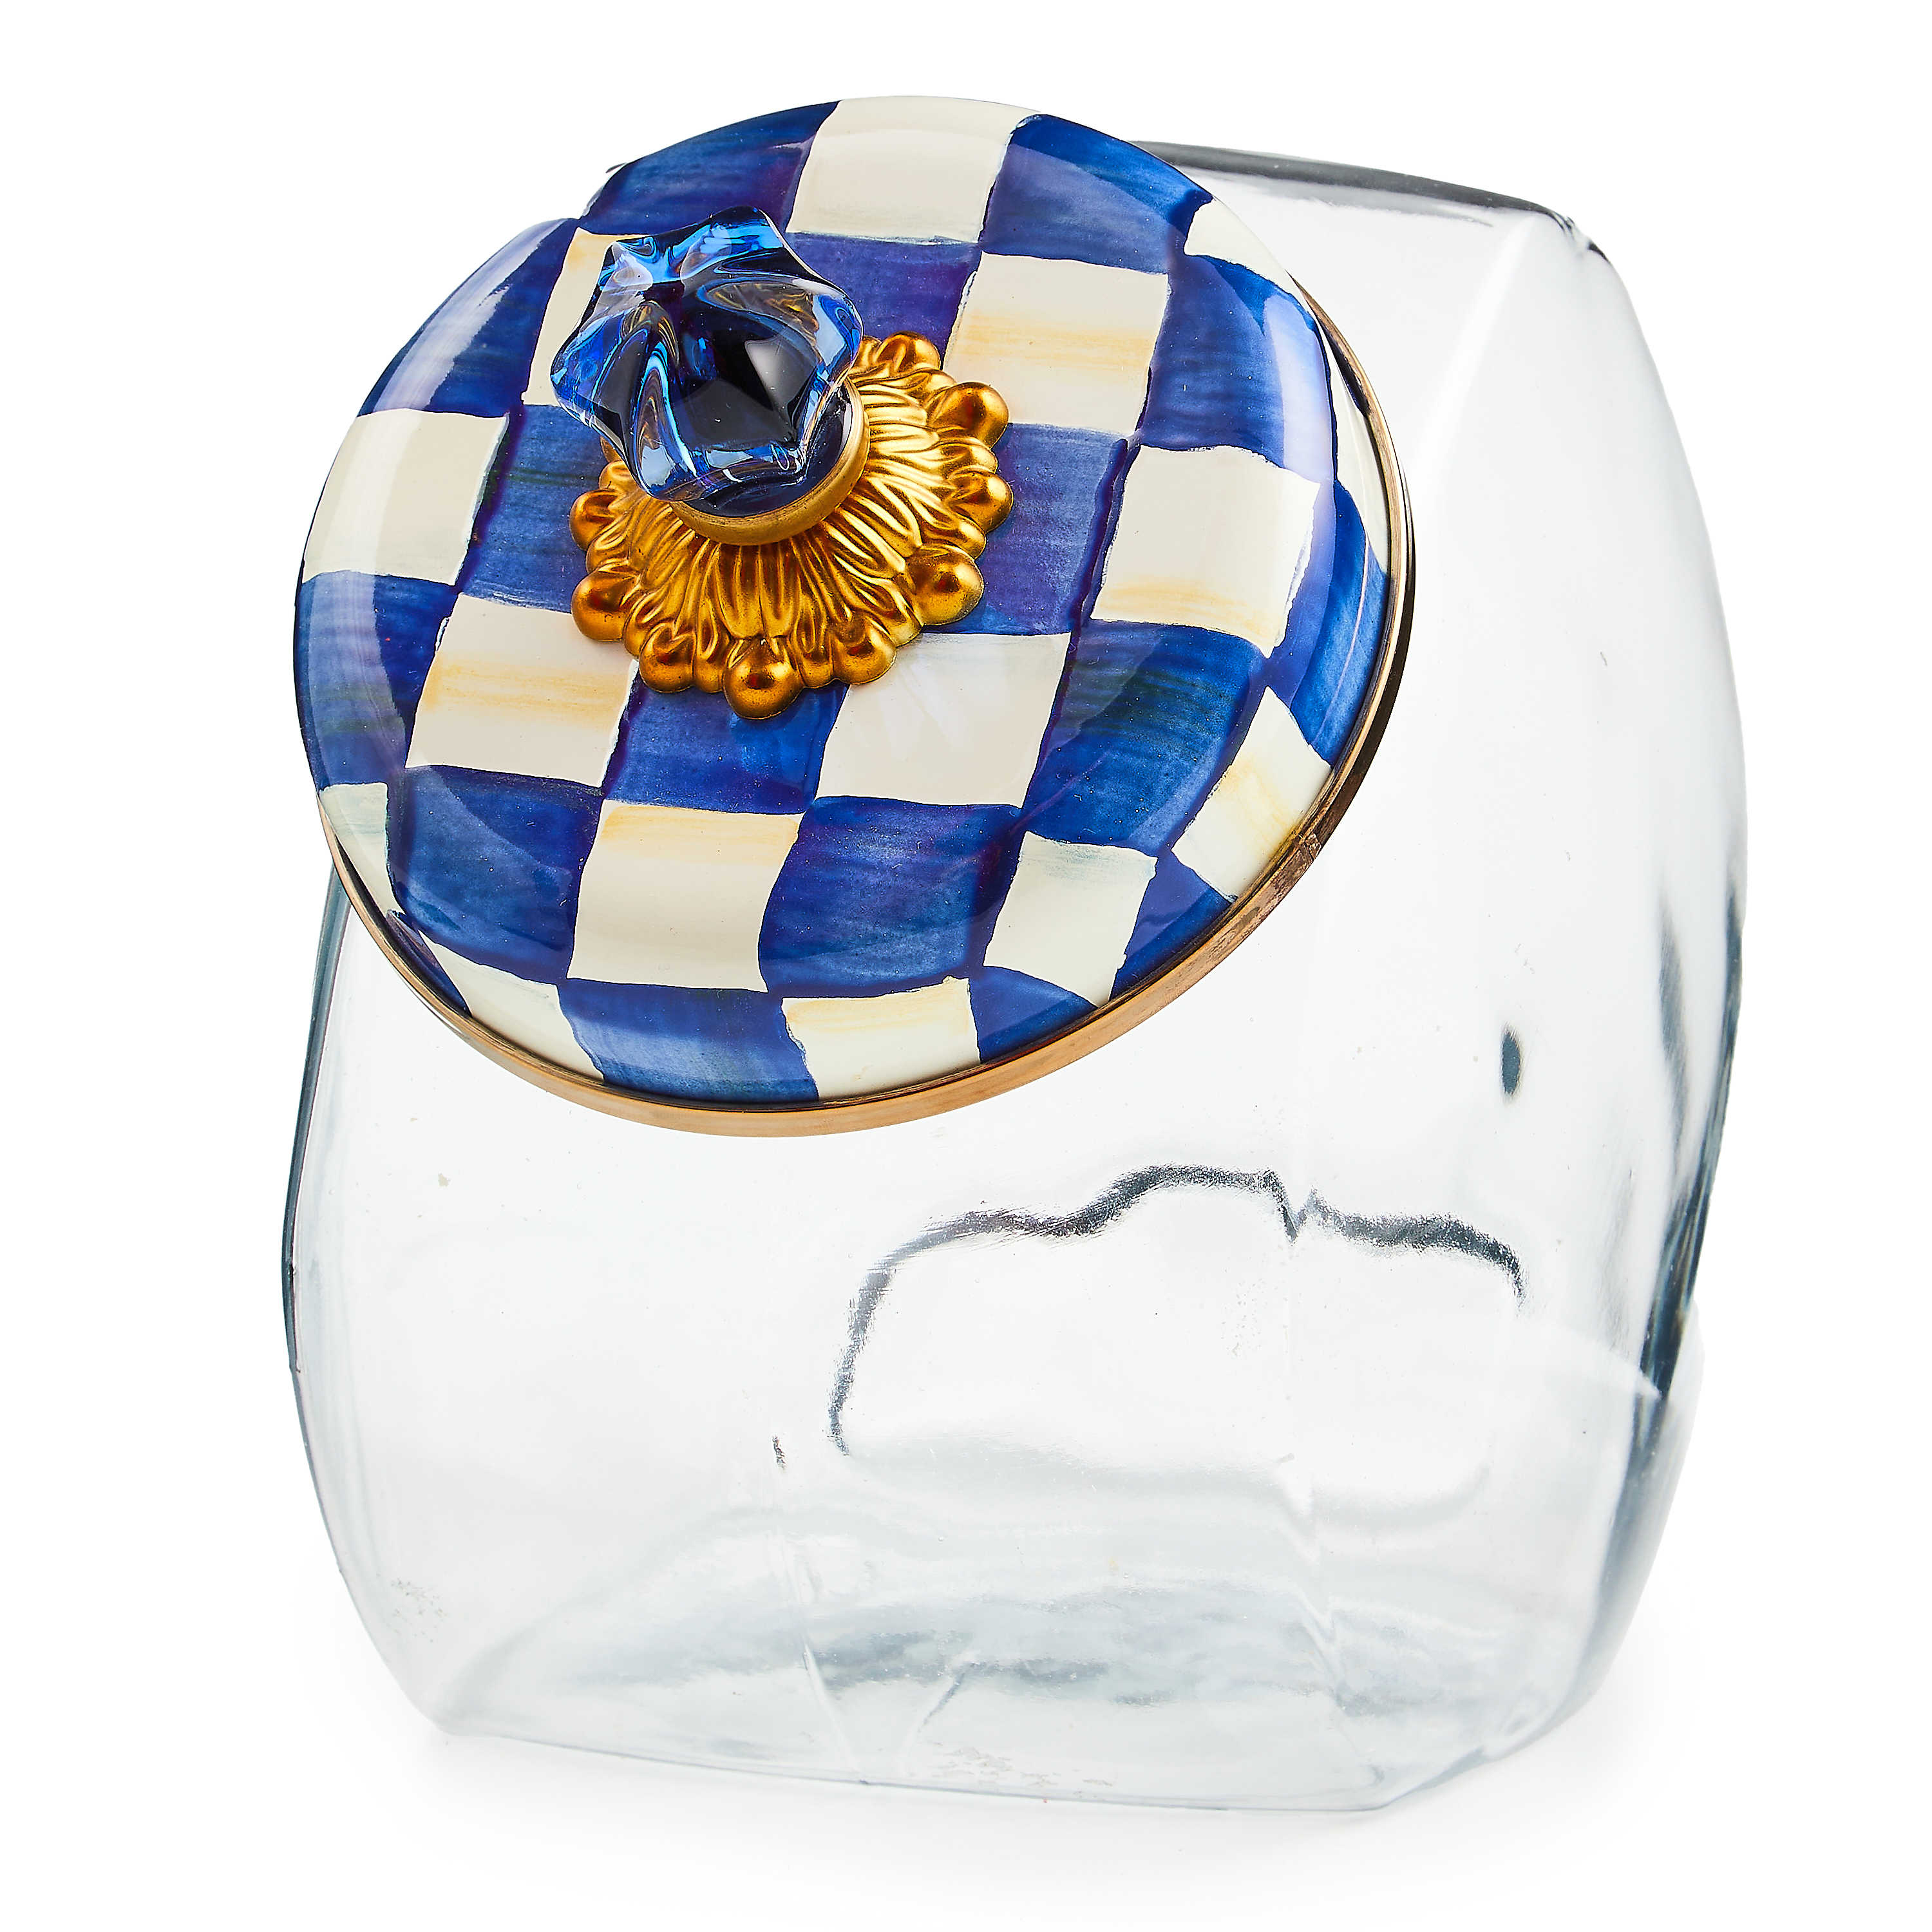 Sweets Jar with Royal Check Lid mackenzie-childs Panama 0